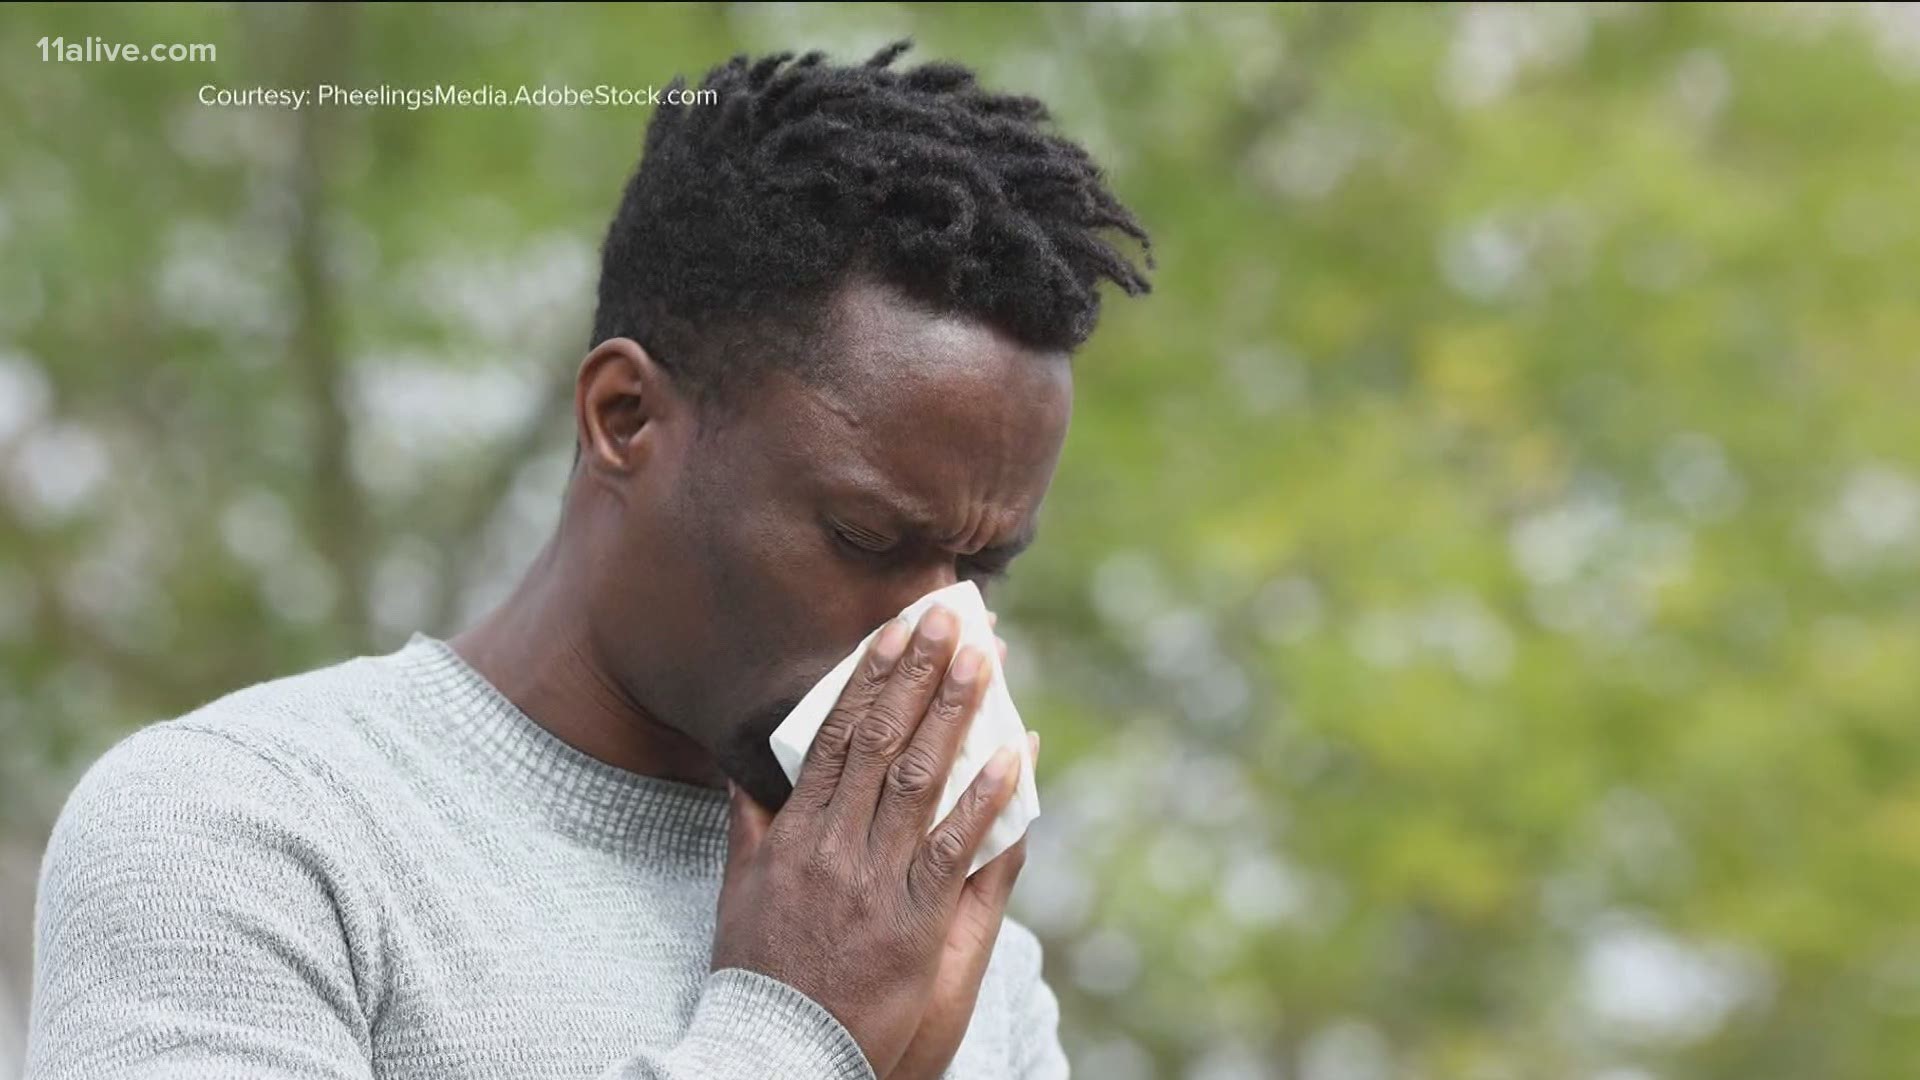 Fall allergies are in full swing for many